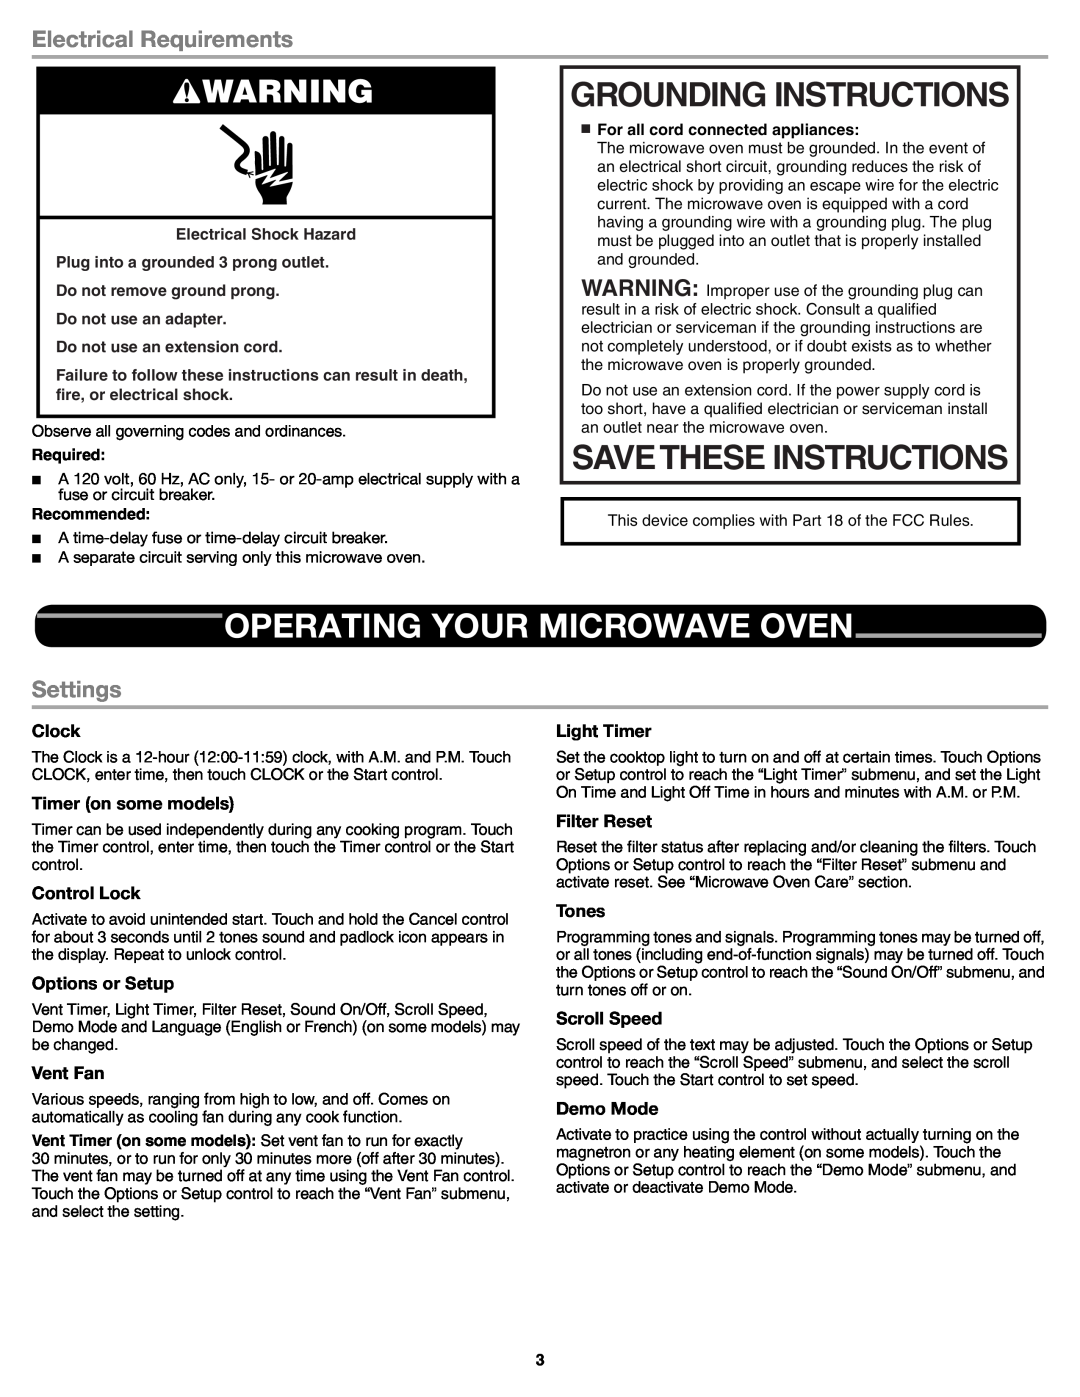 Whirlpool W10545086A, WMH75520AB Grounding Instructions, Operating Your Microwave Oven, Electrical Requirements, Settings 